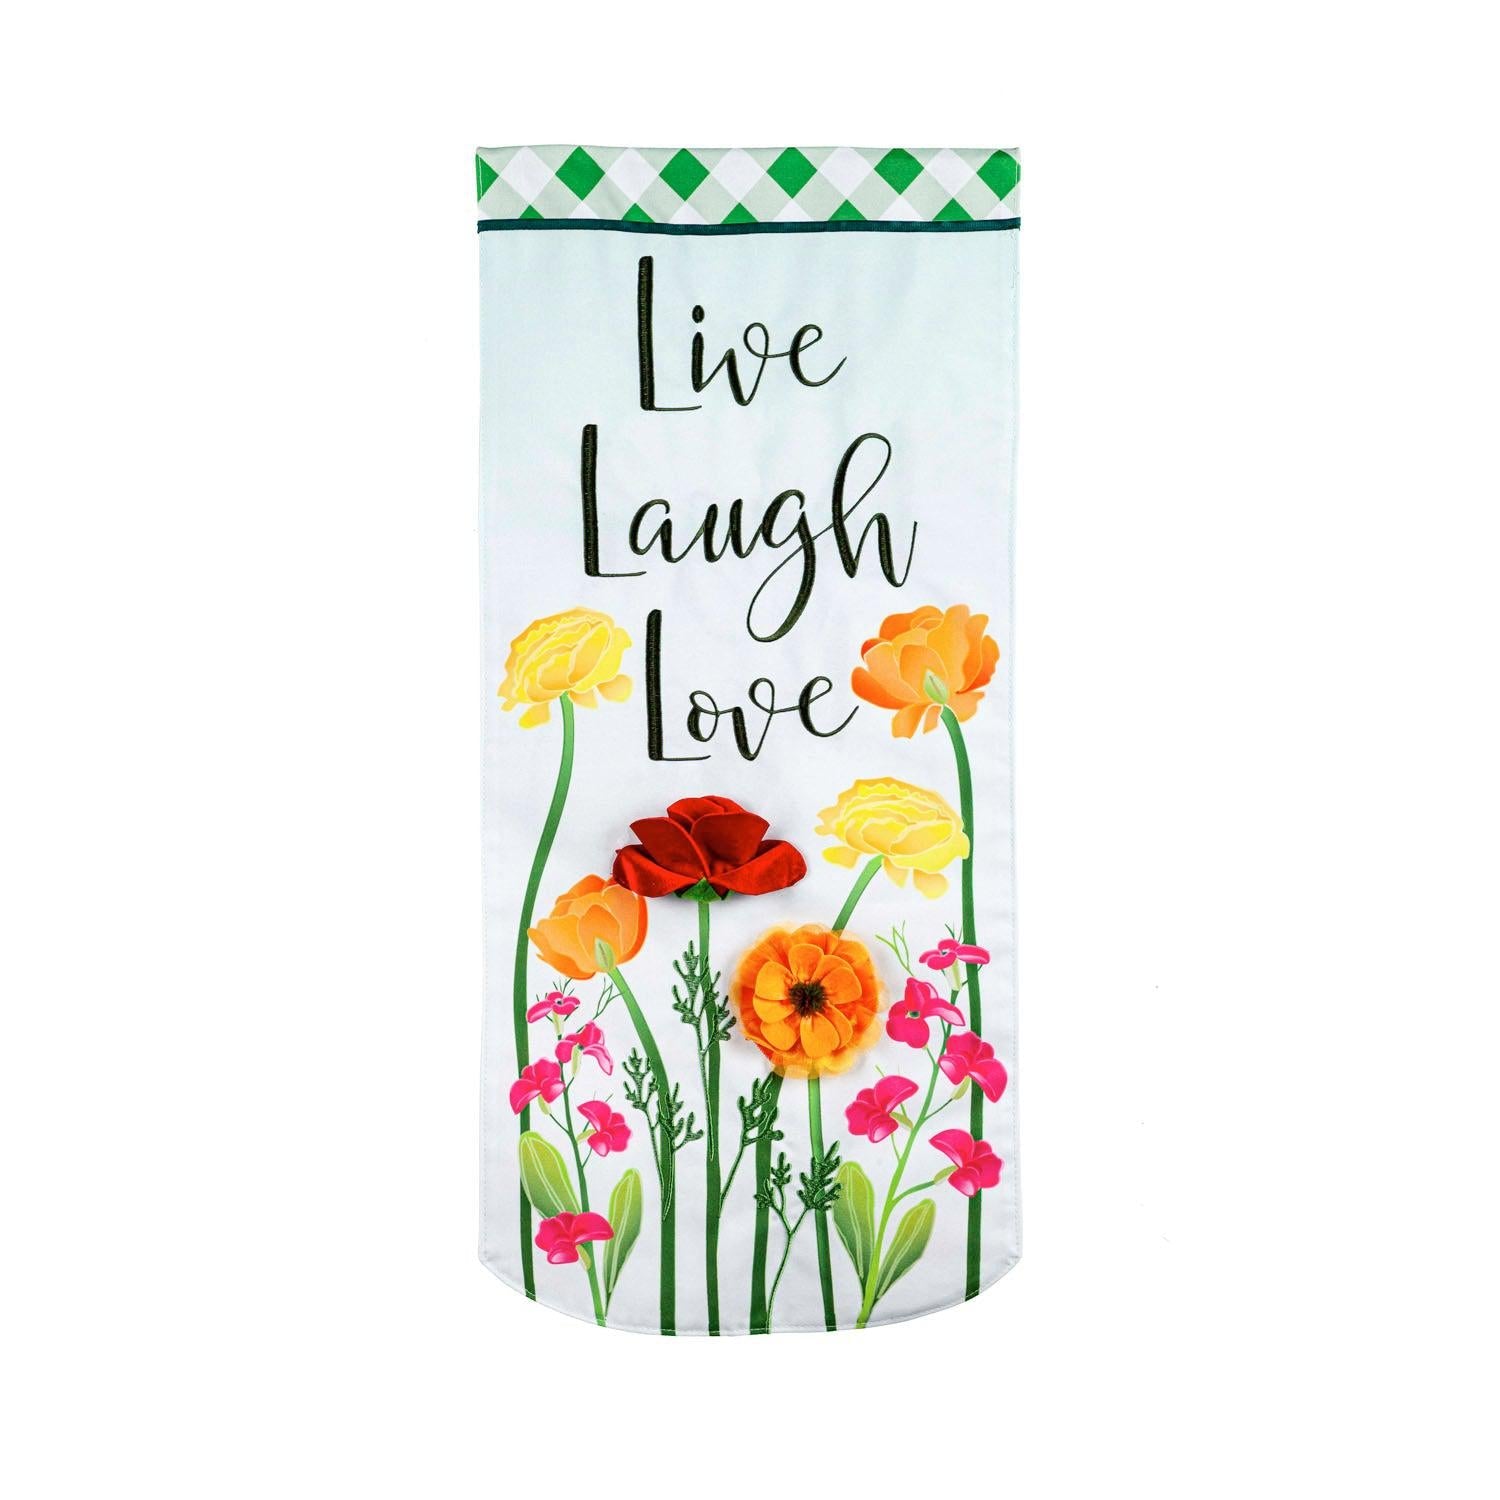 The Live Laugh Love Floral Textile Décor from the Everlasting Impressions collection features wildflowers, a lattice-look top border, and the words "Live Laugh Love".